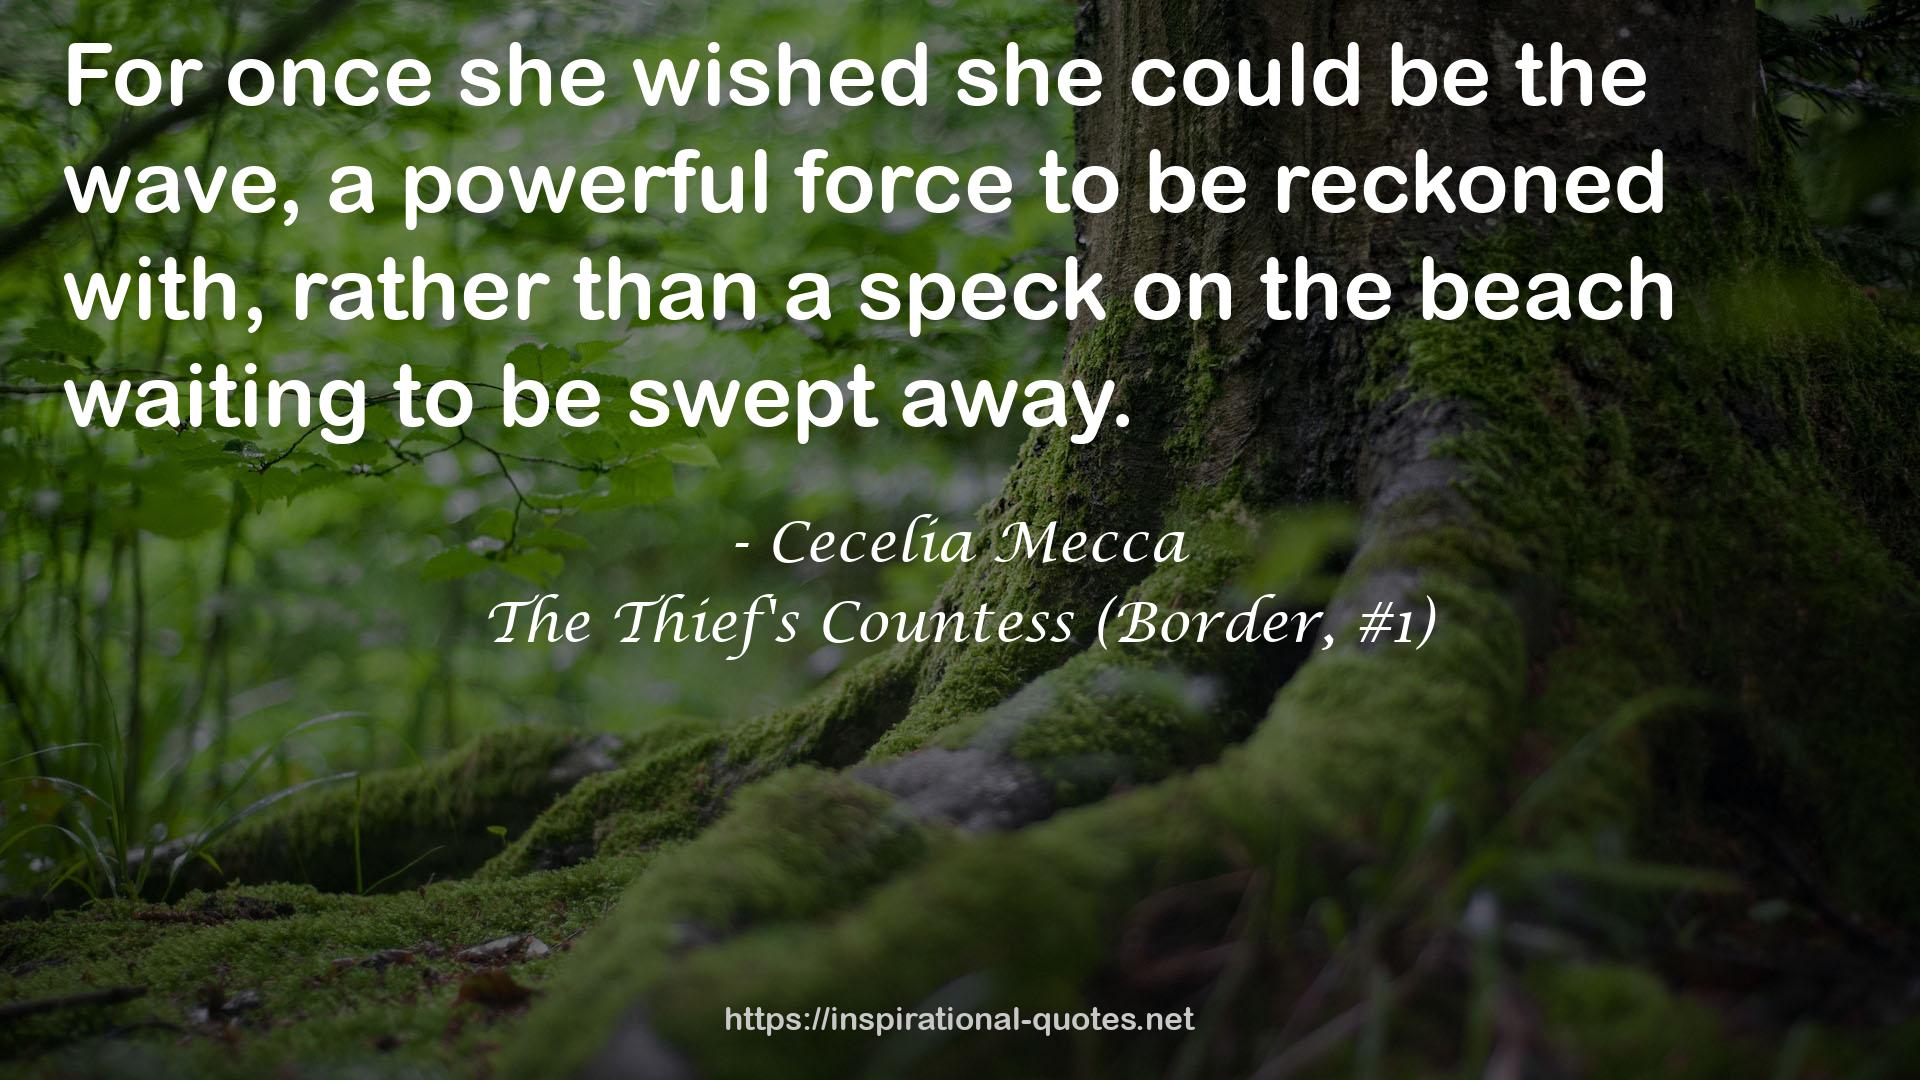 The Thief's Countess (Border, #1) QUOTES